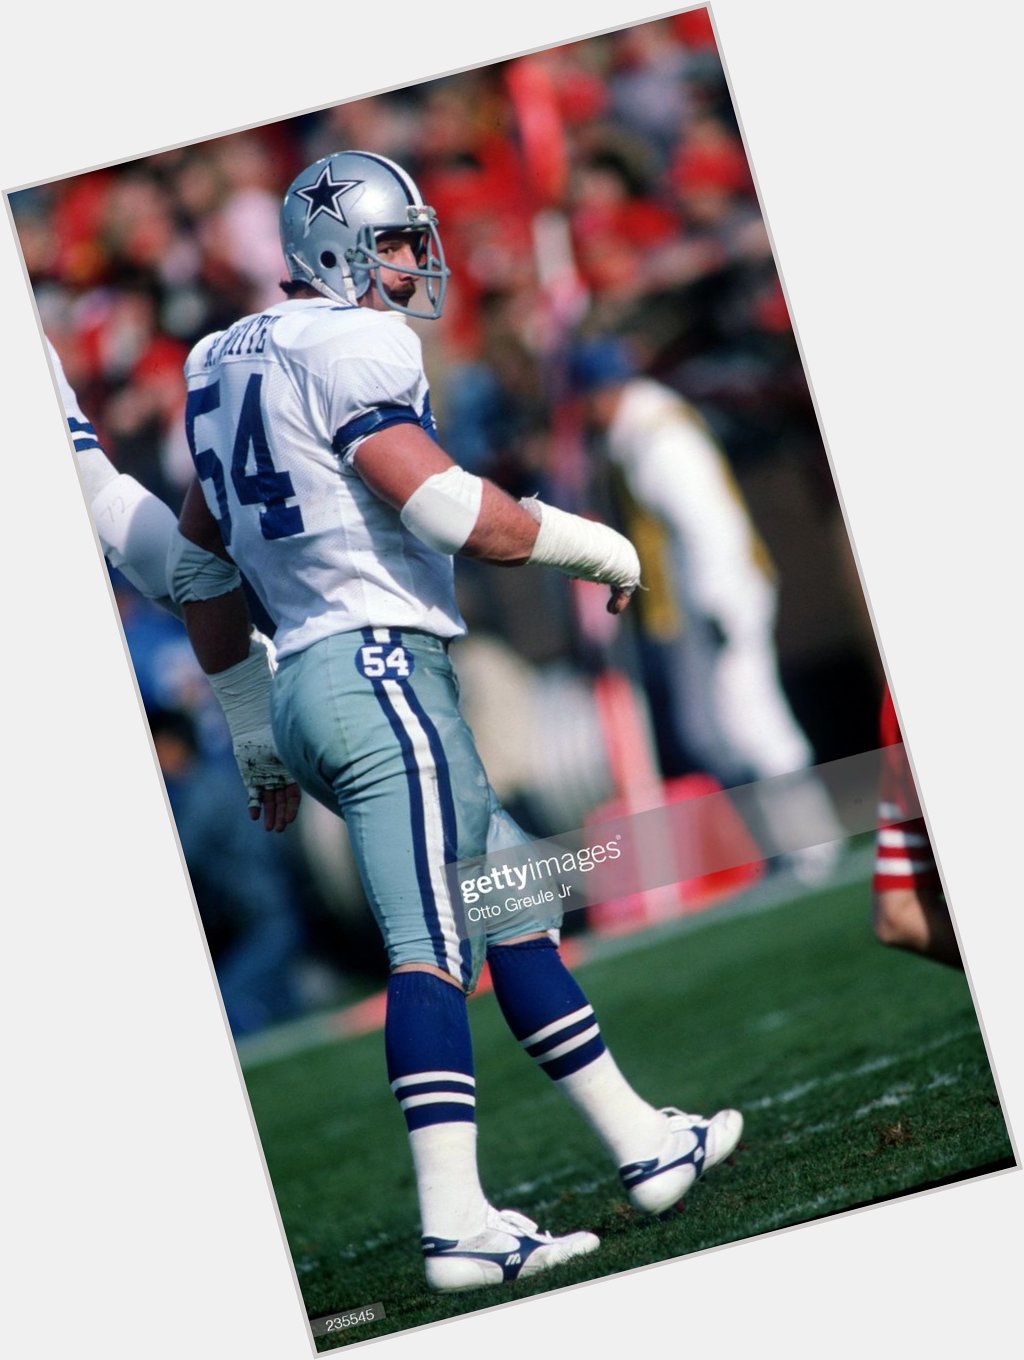 January 15th:
Happy 68th Birthday to Randy White The Manster -  